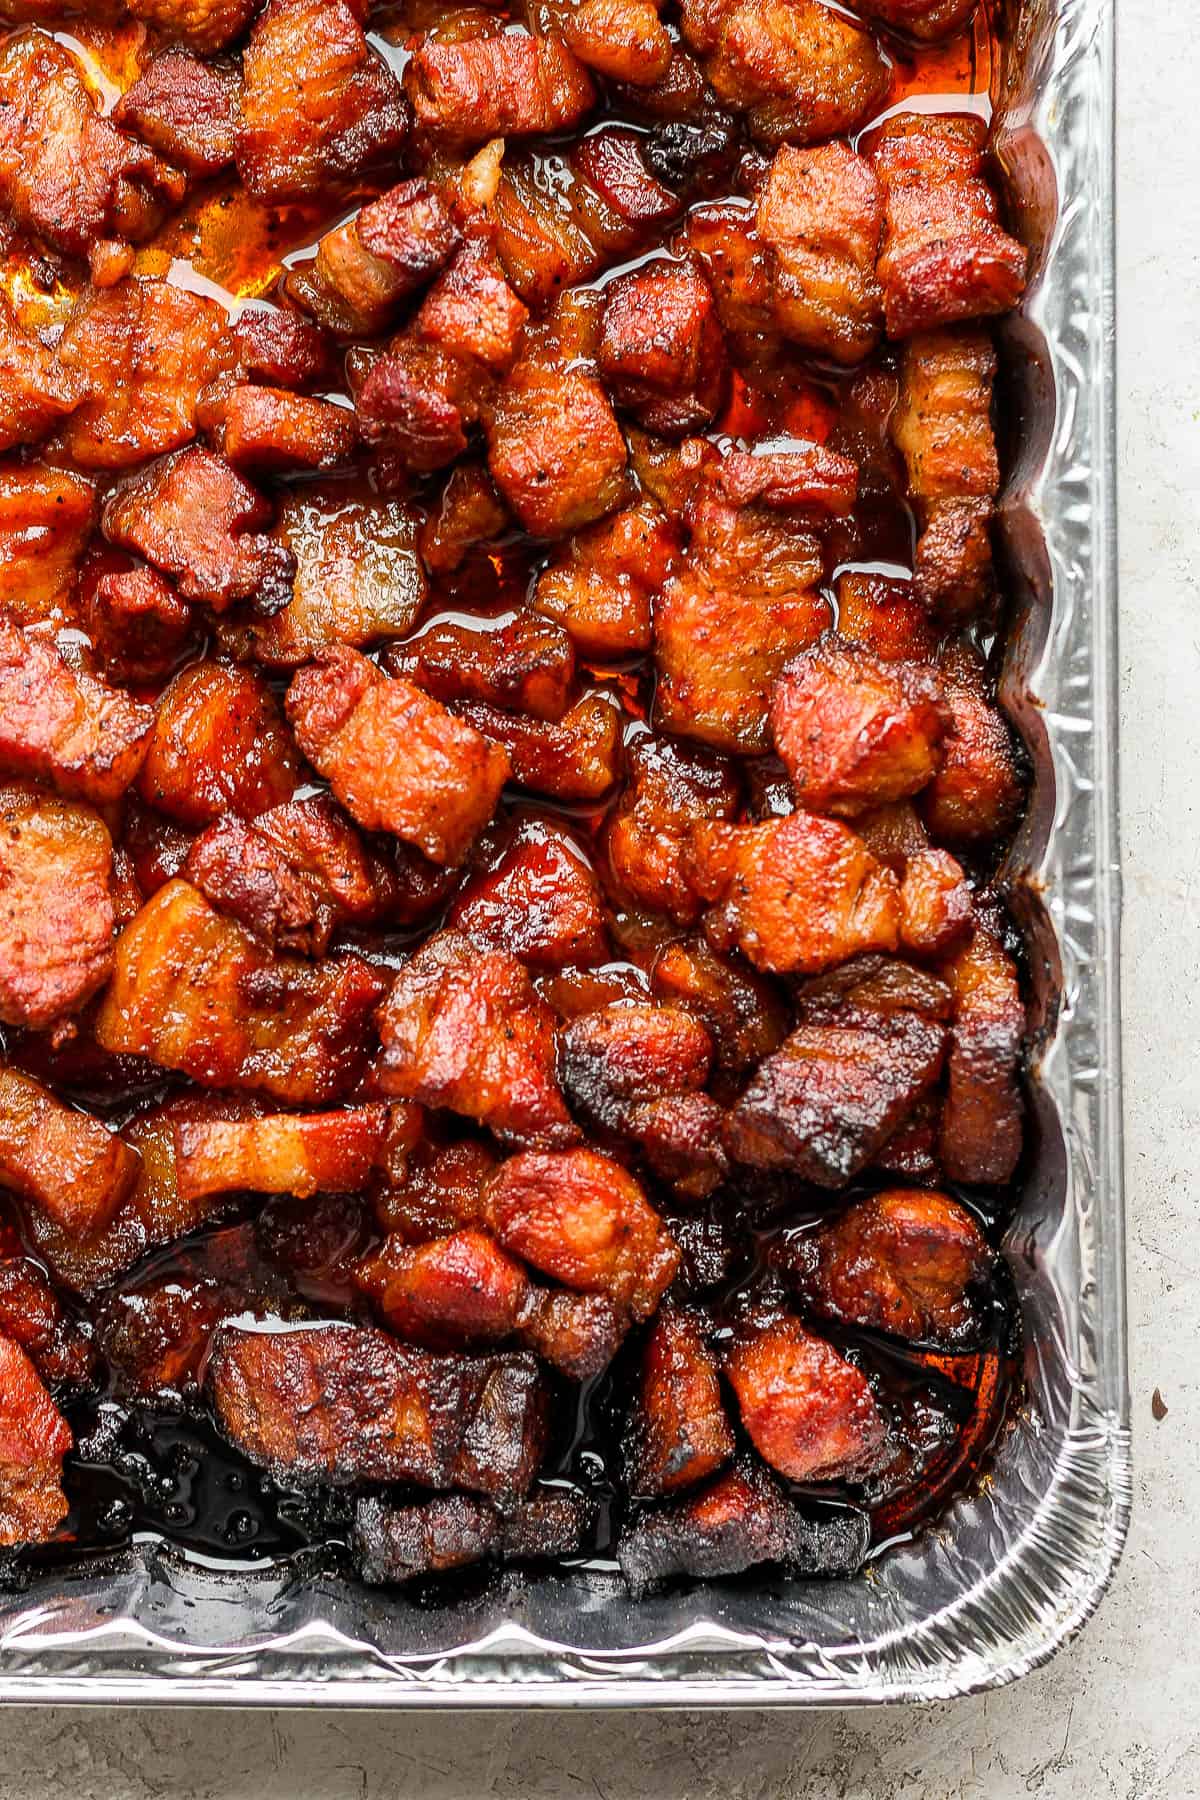 Fully cooked pork belly burnt ends in an aluminum tray.